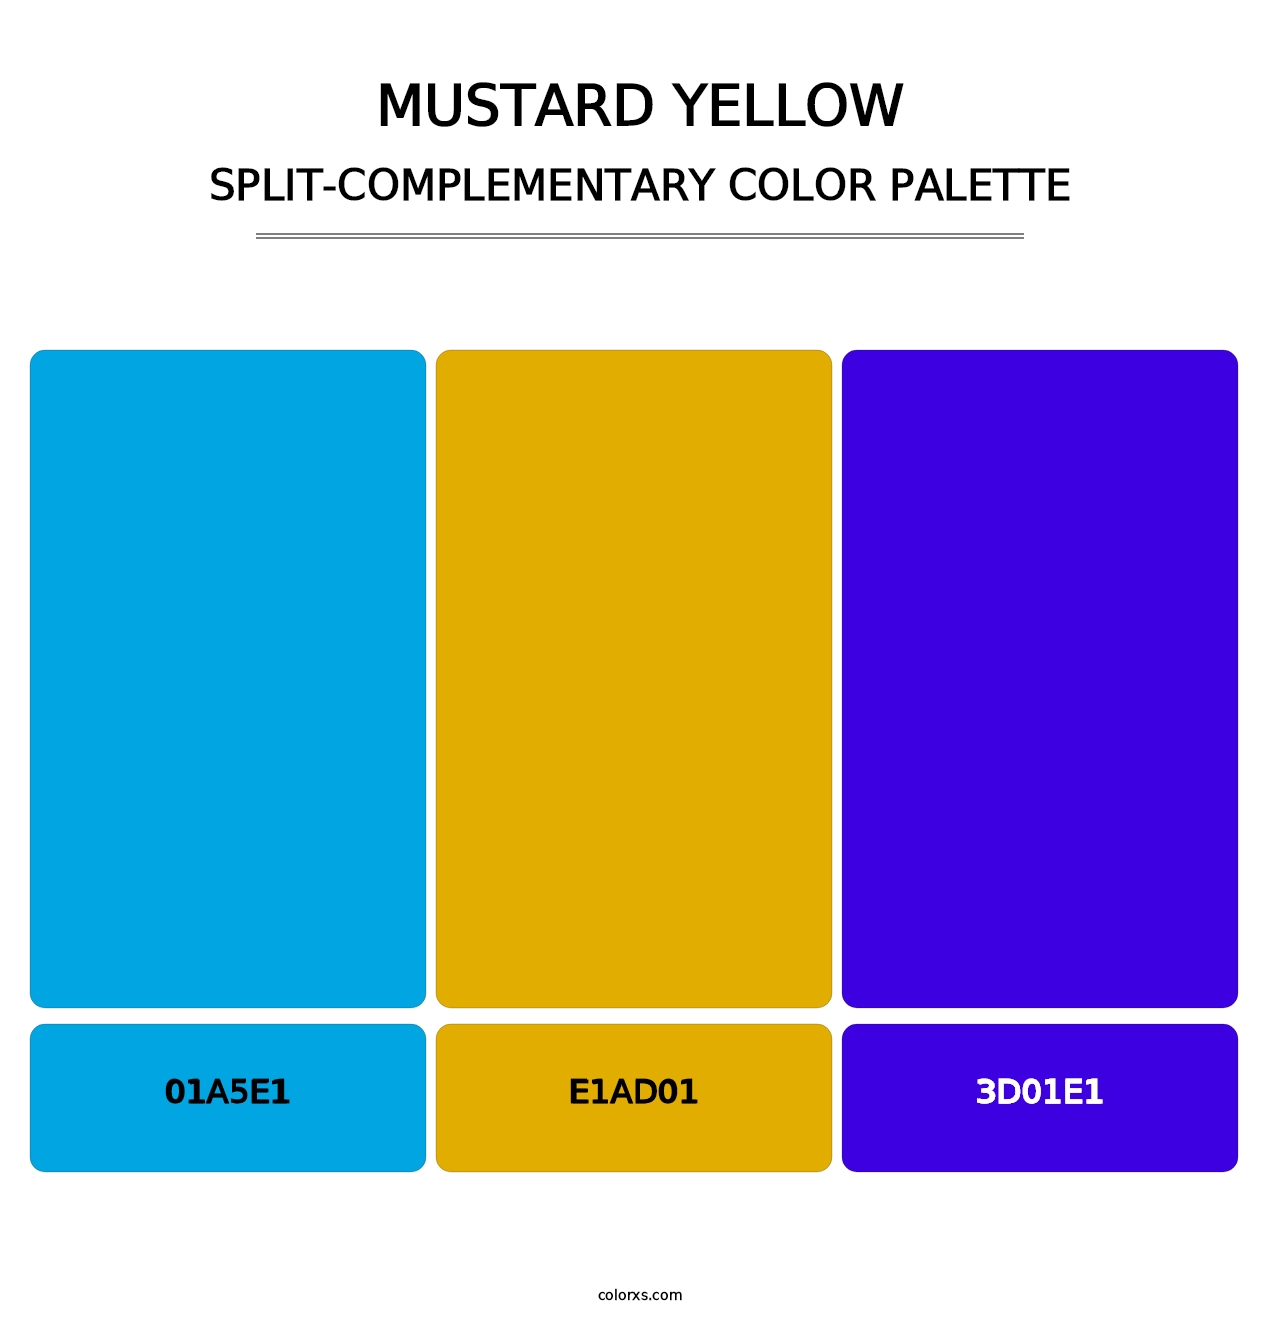 Mustard Yellow - Split-Complementary Color Palette